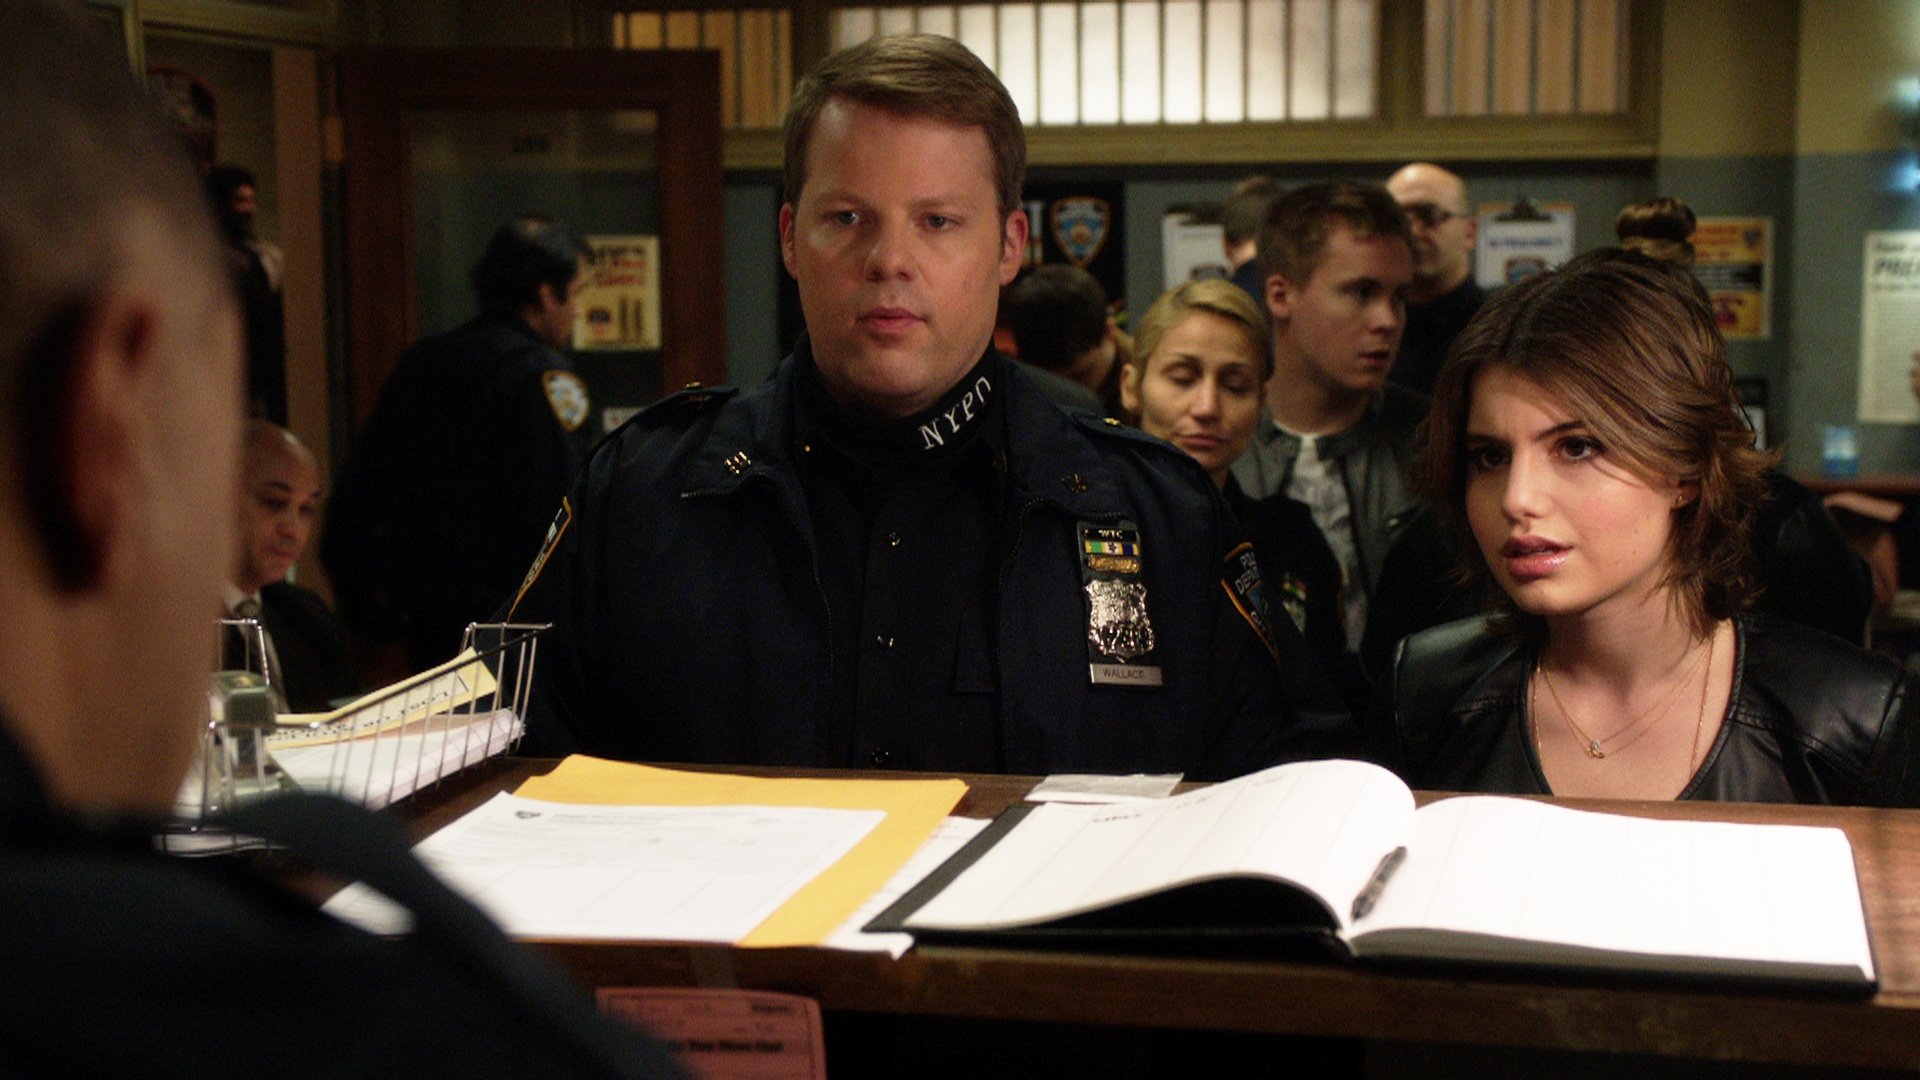 Sami Gayle as Nicky on Blue Bloods in a police station